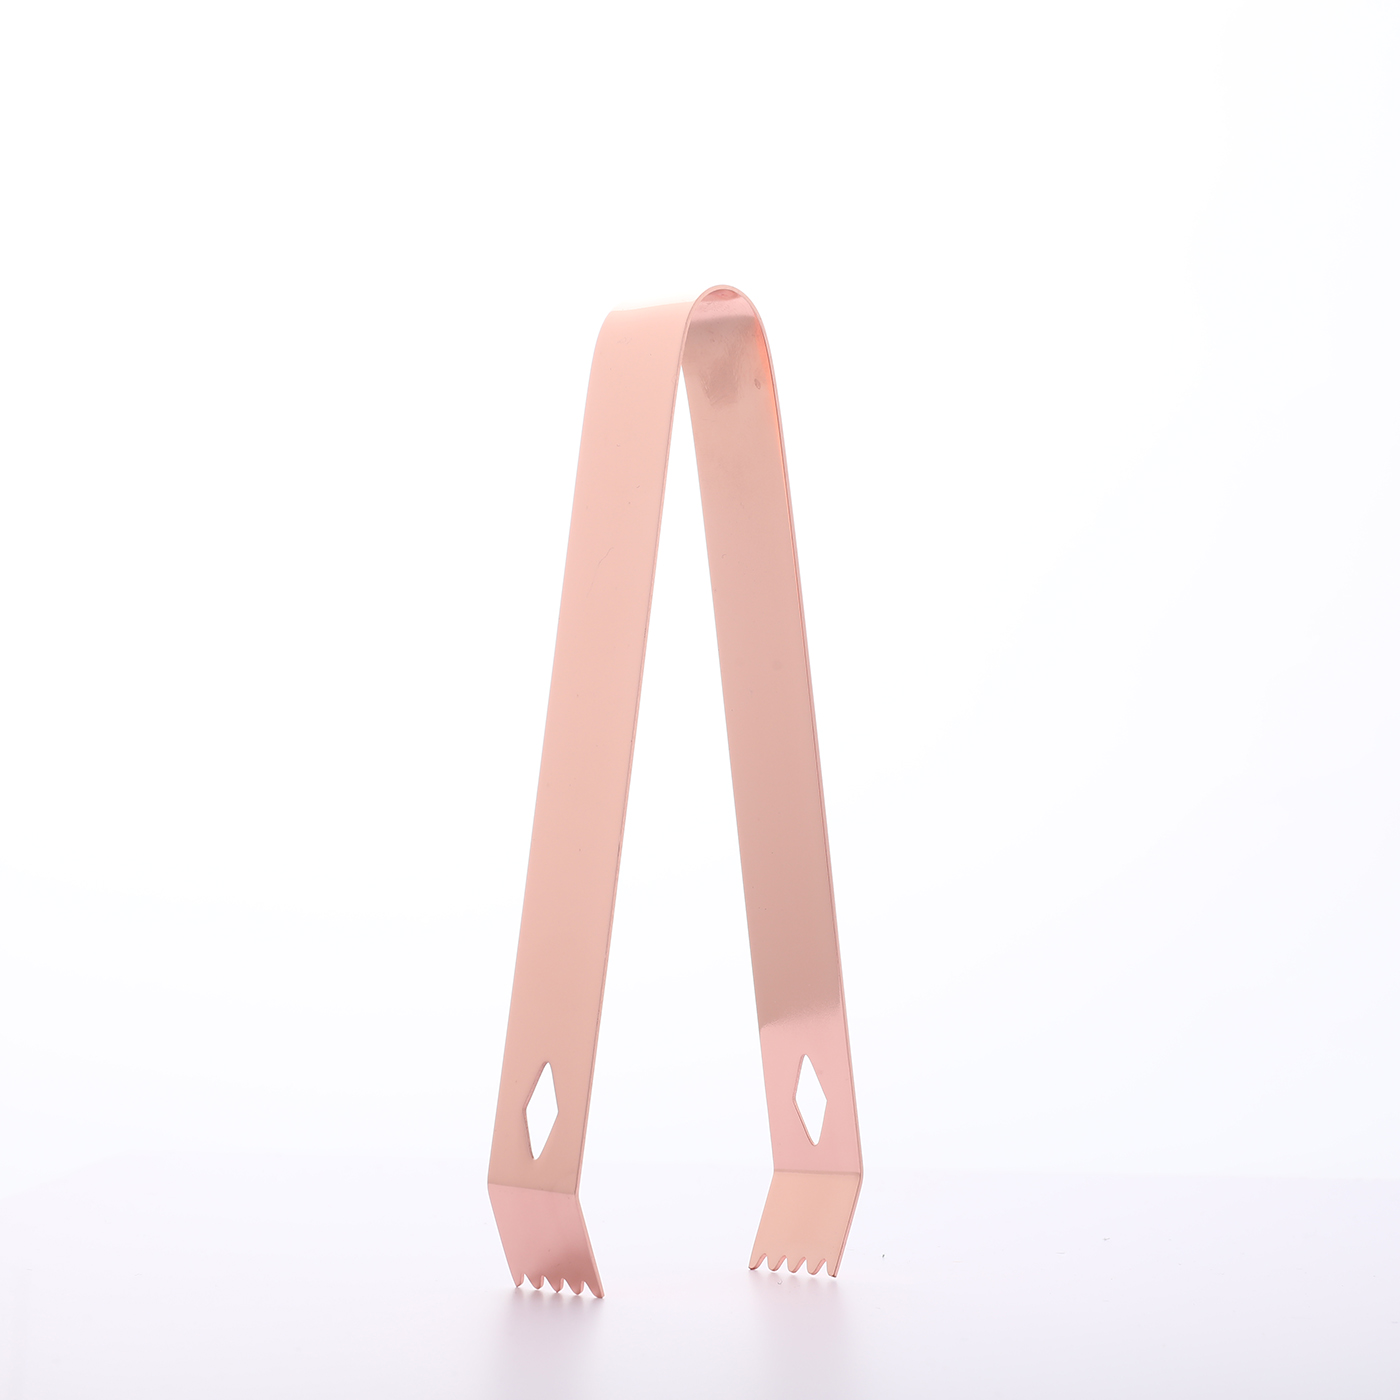 Promo Copper Finished Ice Tong2